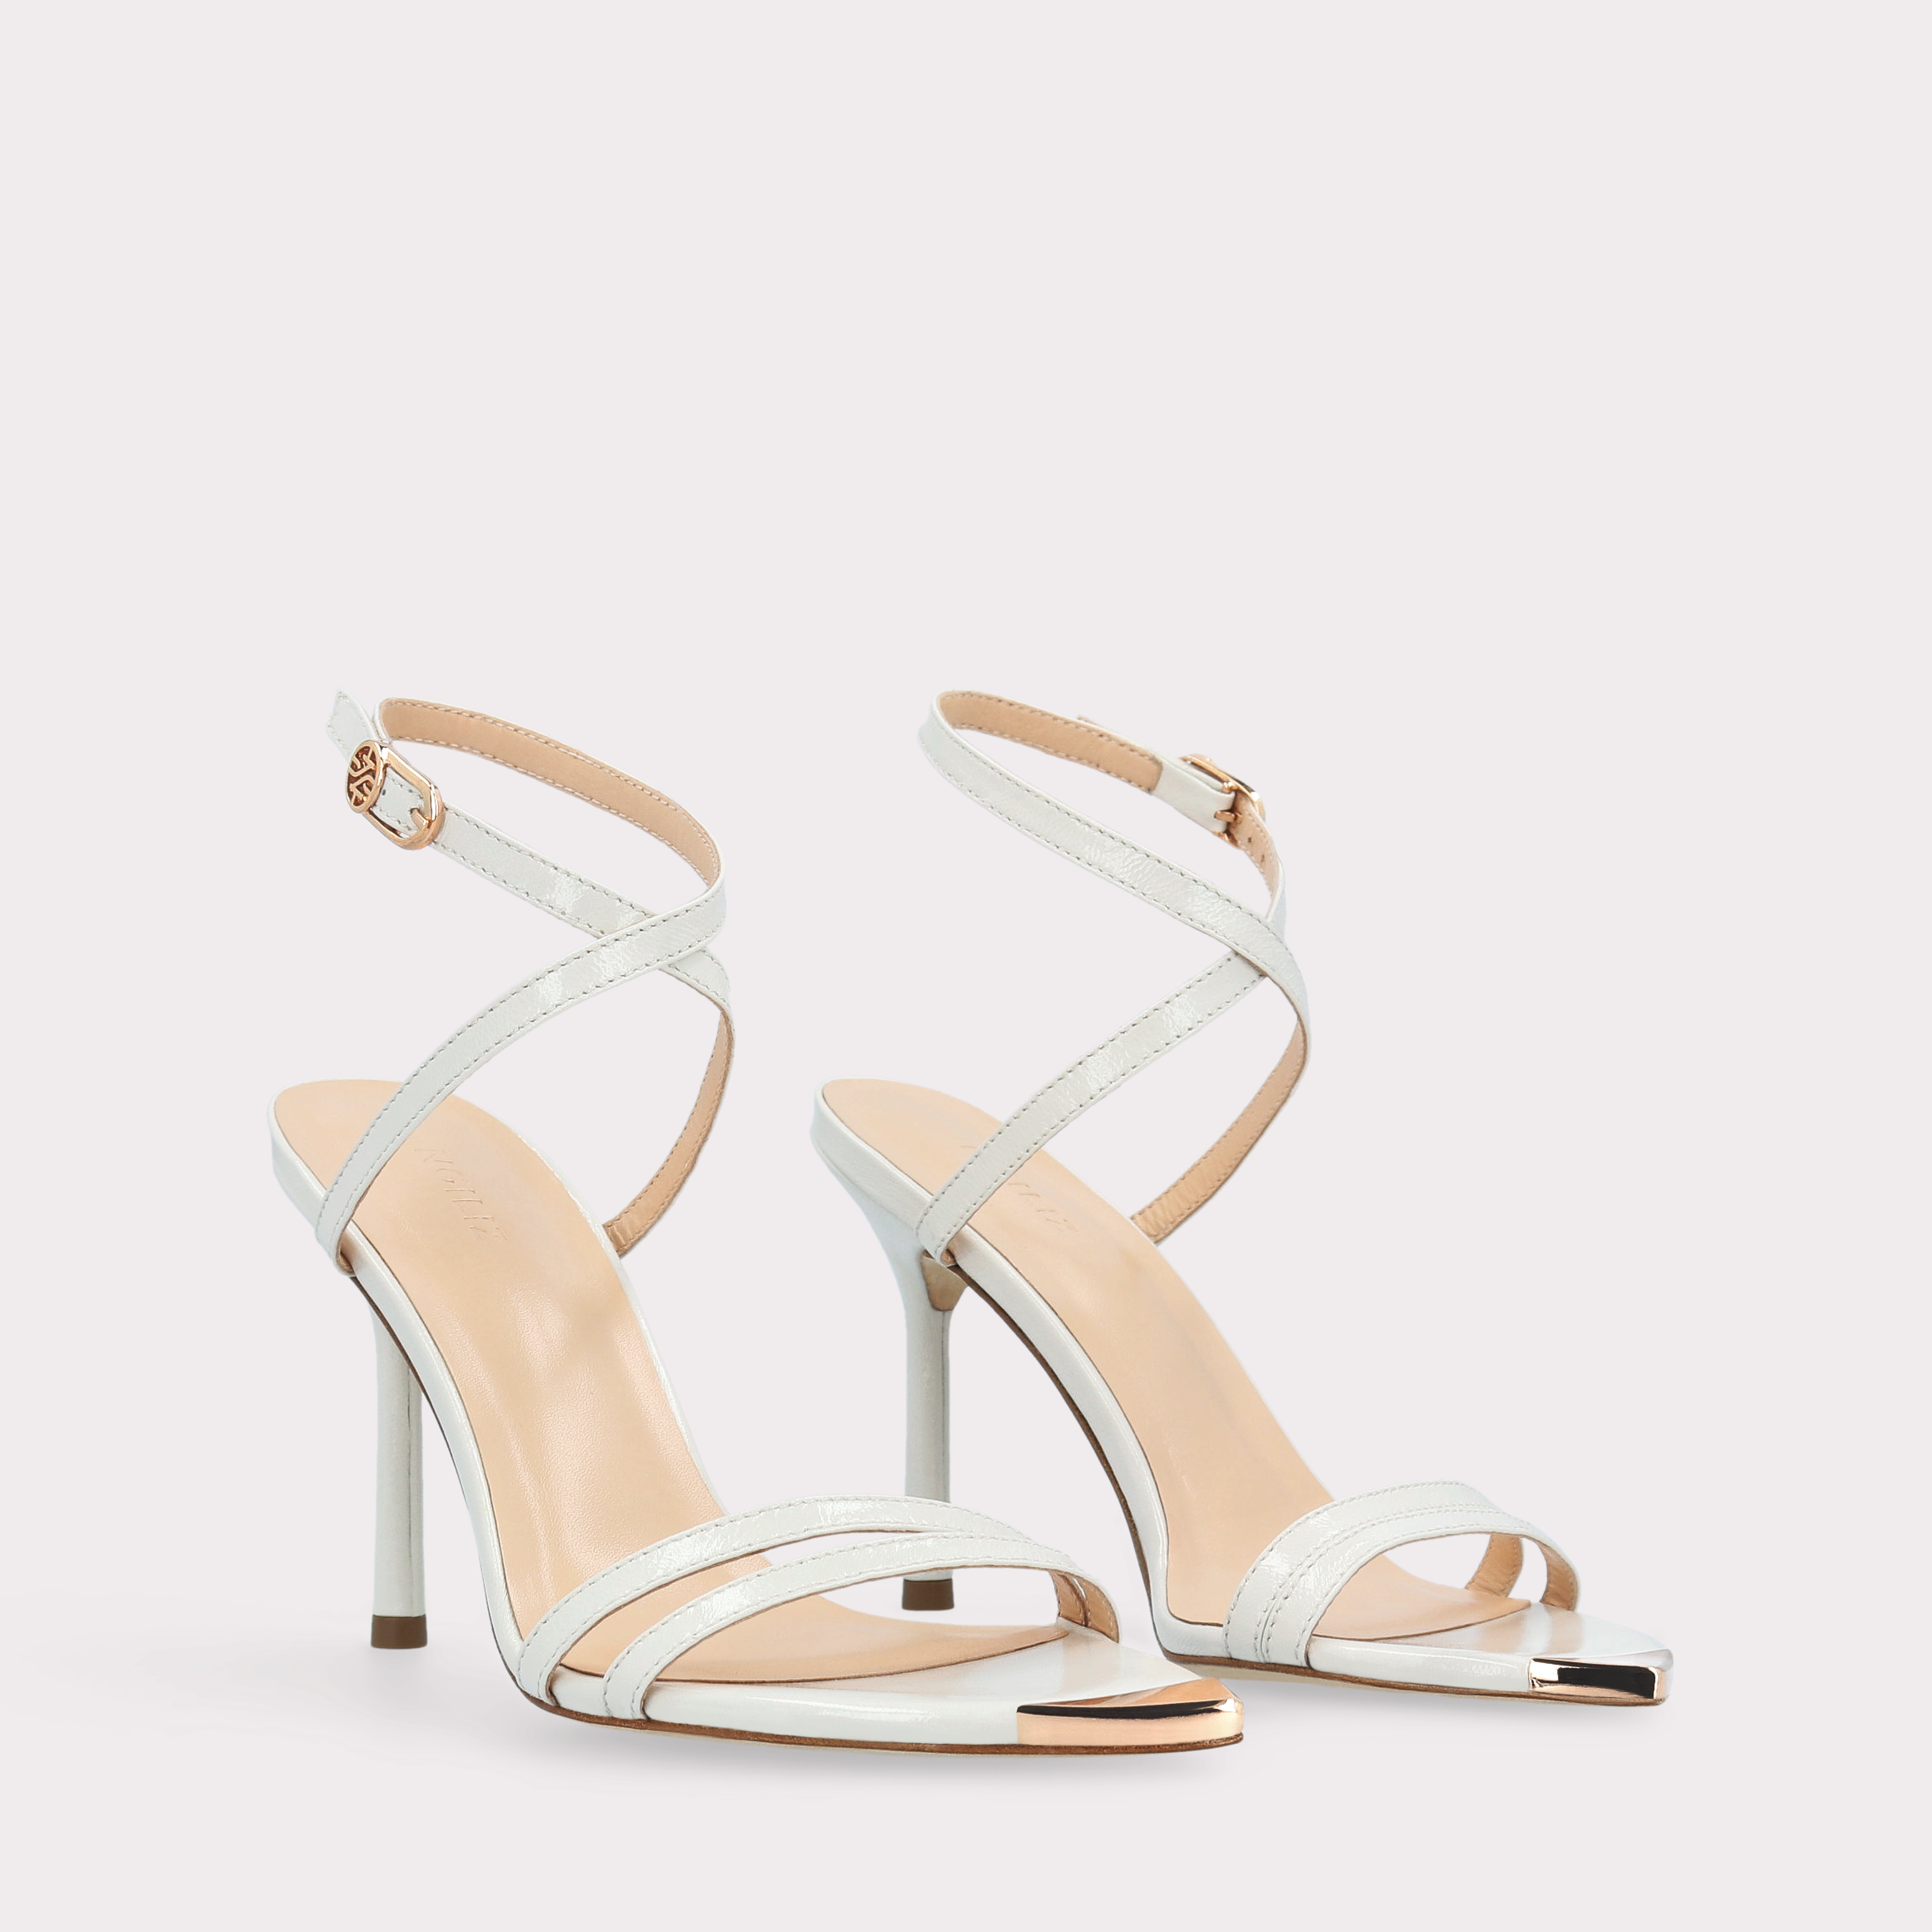 ANNY 10 IVORY LEATHER SANDALS